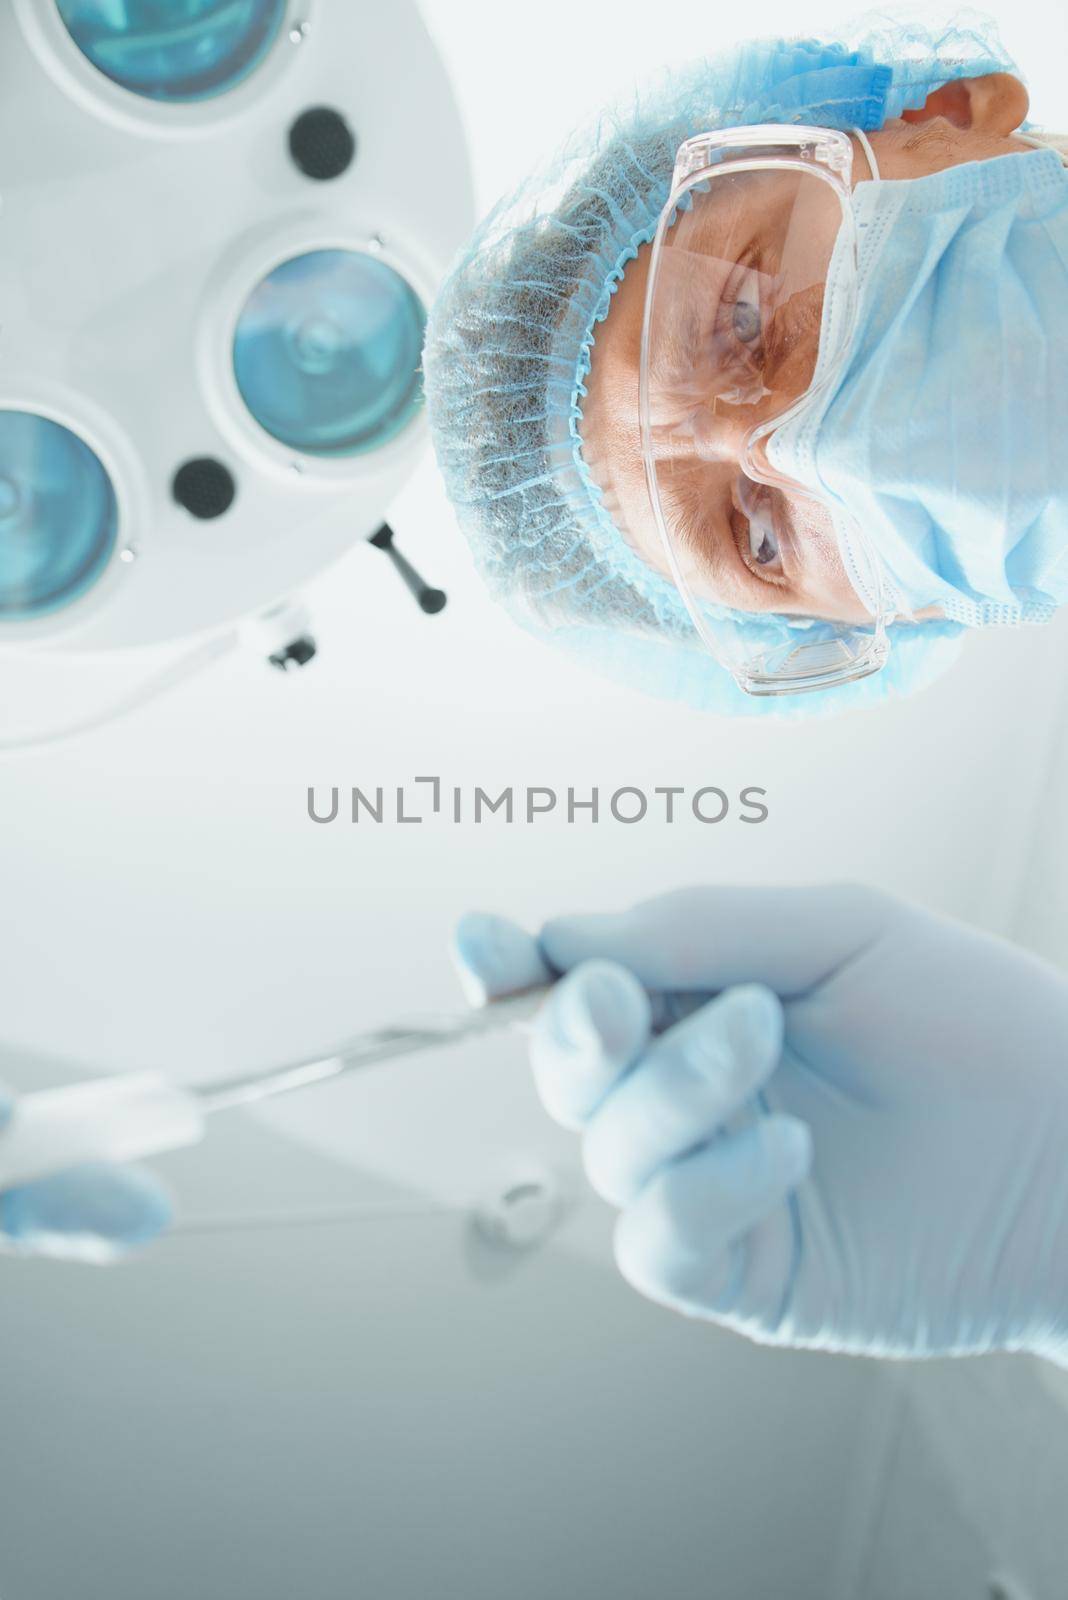 Man surgeon in protective uniform takes a scalpel on operation